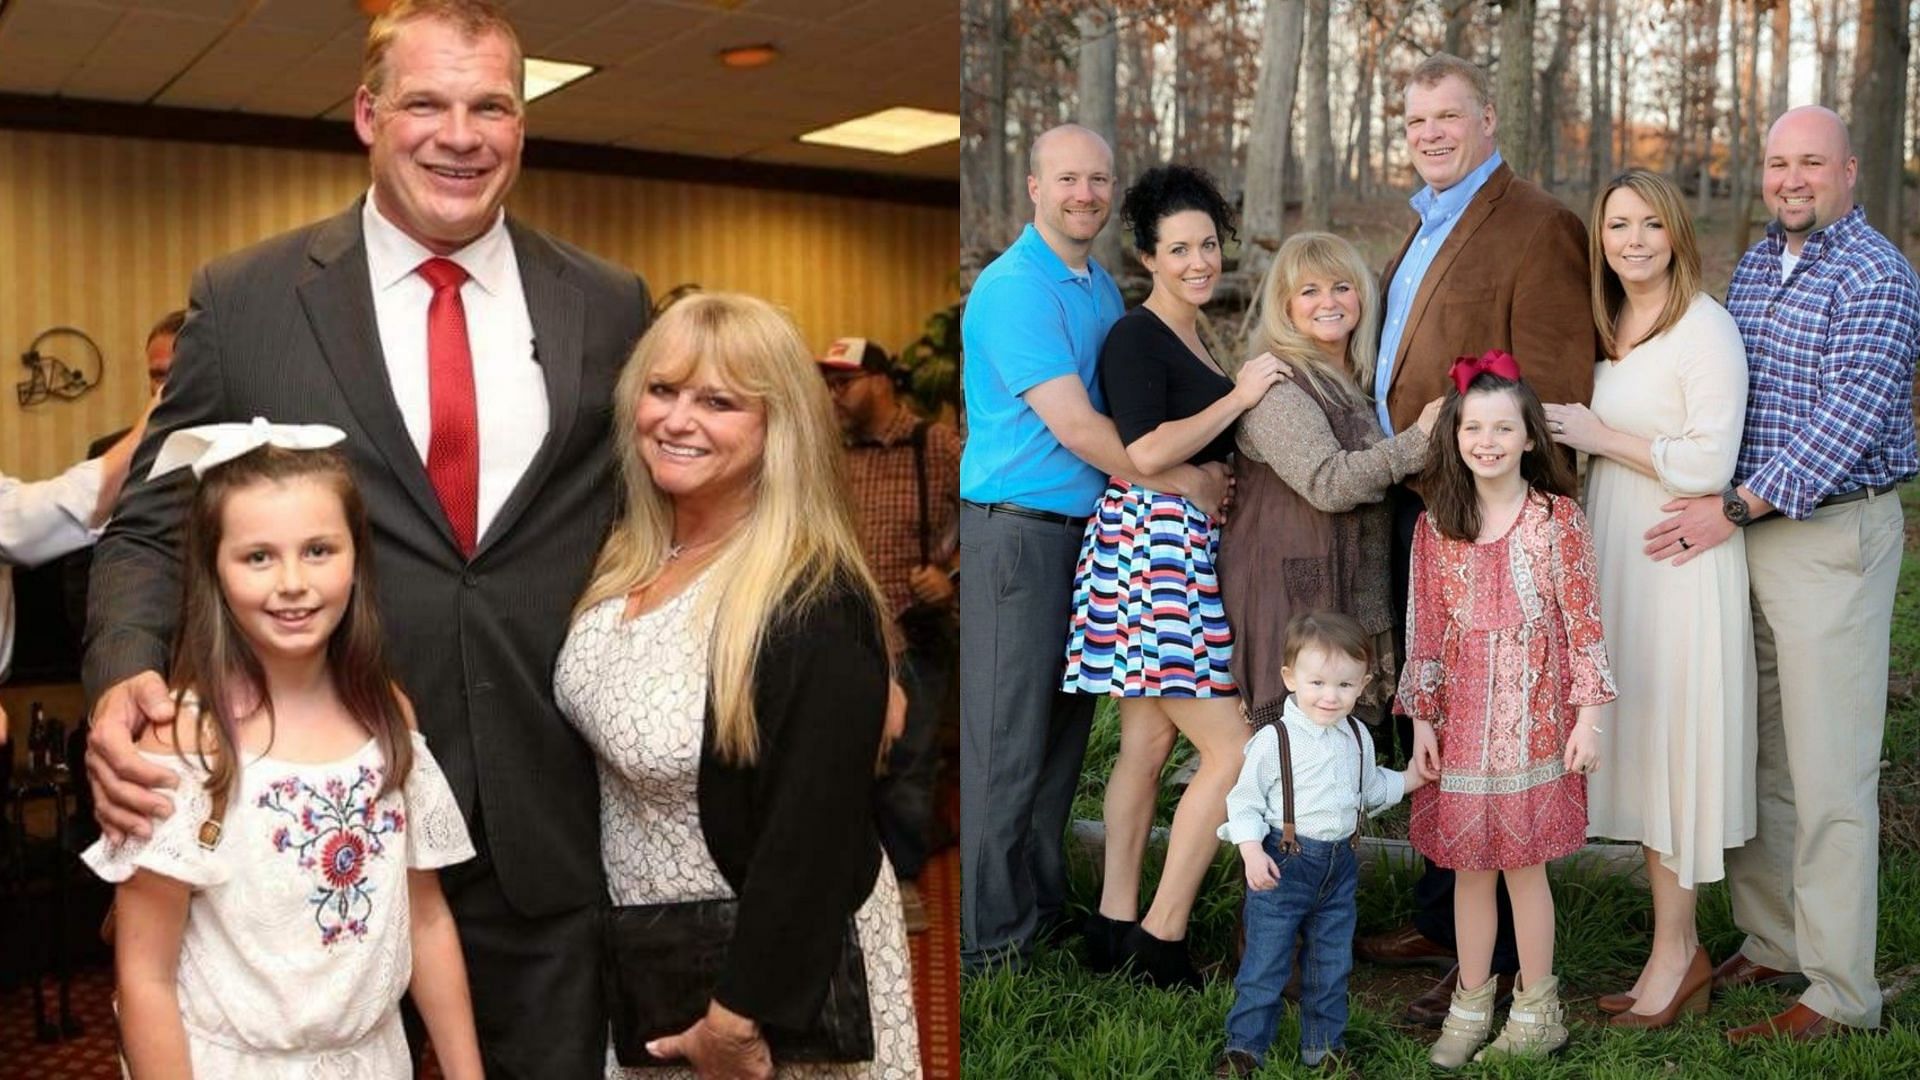 WWE Hall of Famer Kane with his family